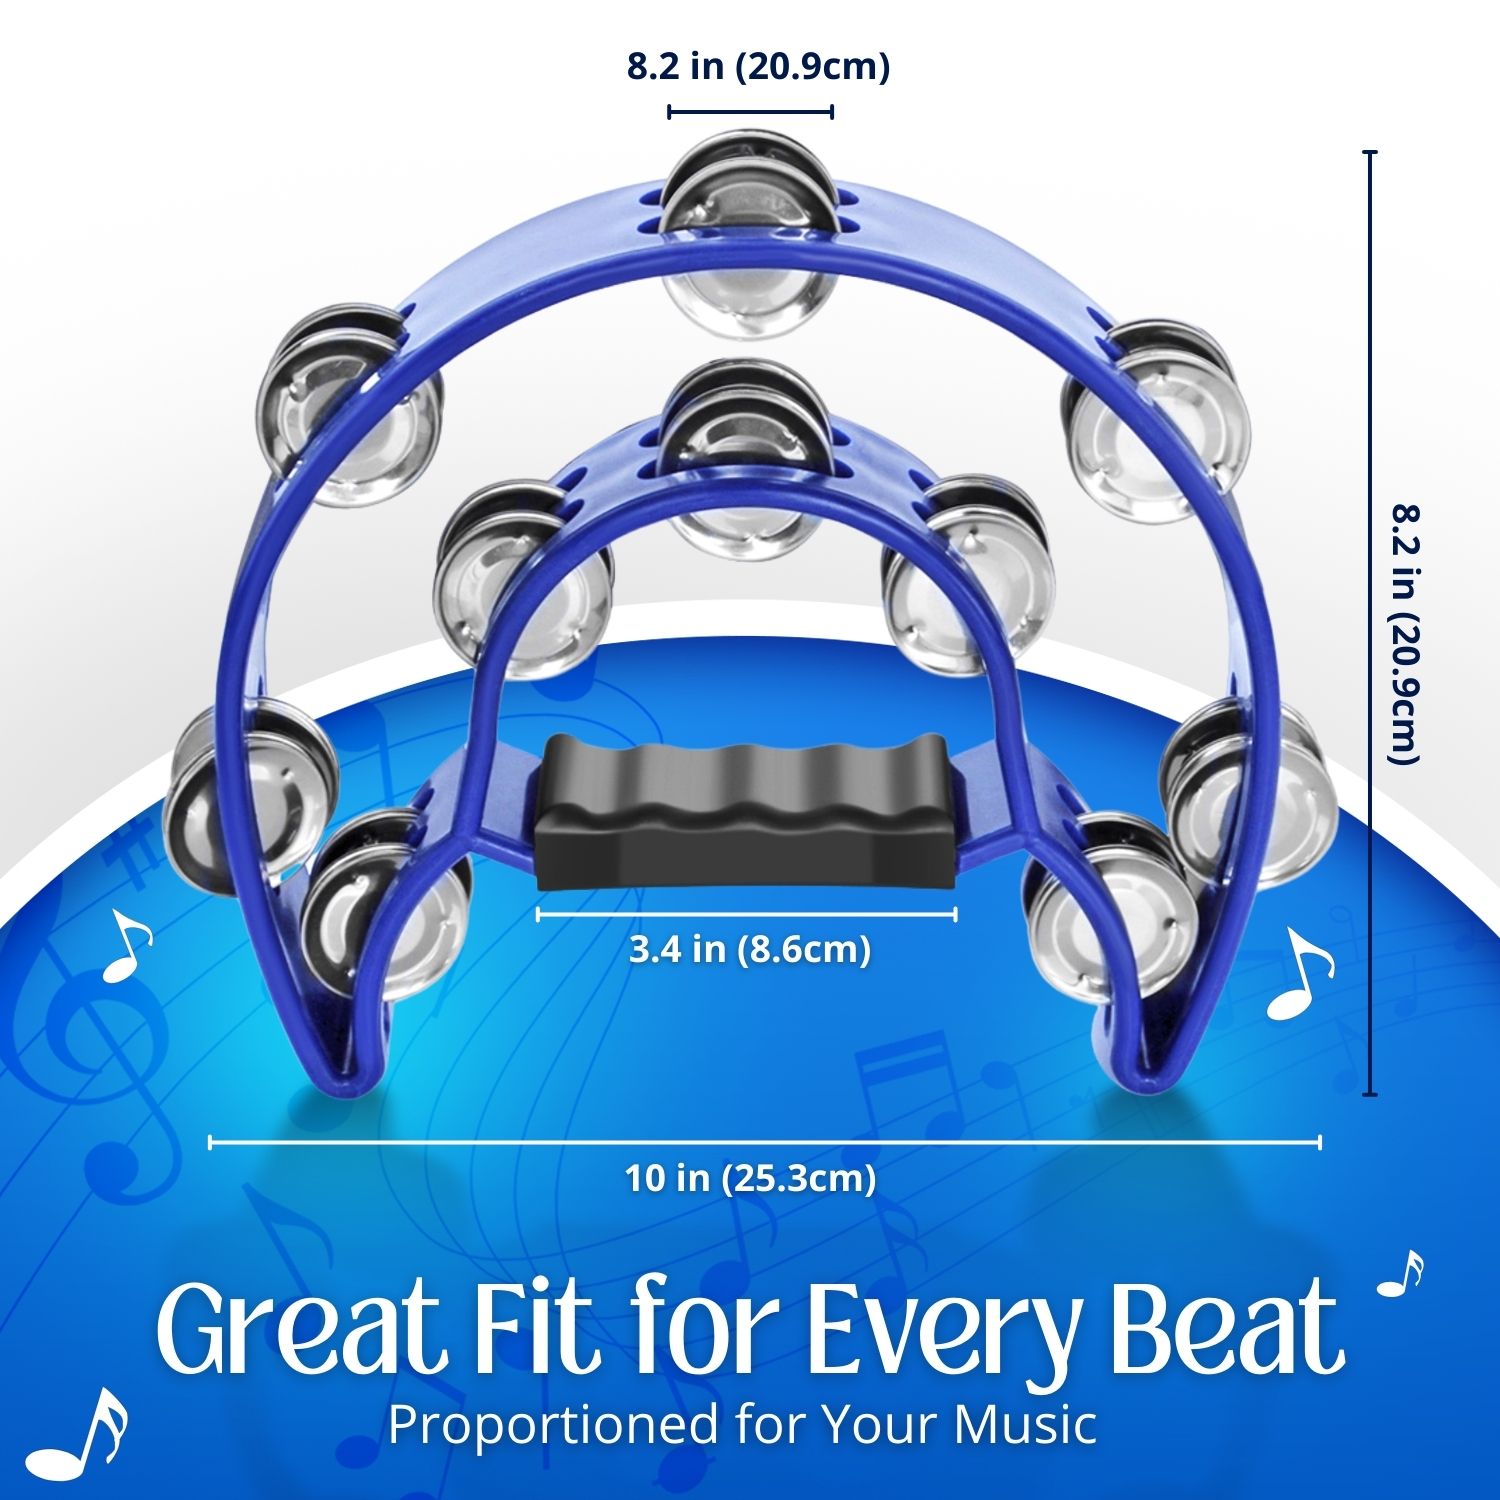 Bright & Enjoyable Sound - A double row of 40 jingles, the tambourine for adults generated good quality, vibrant, and entertaining music for everyone.